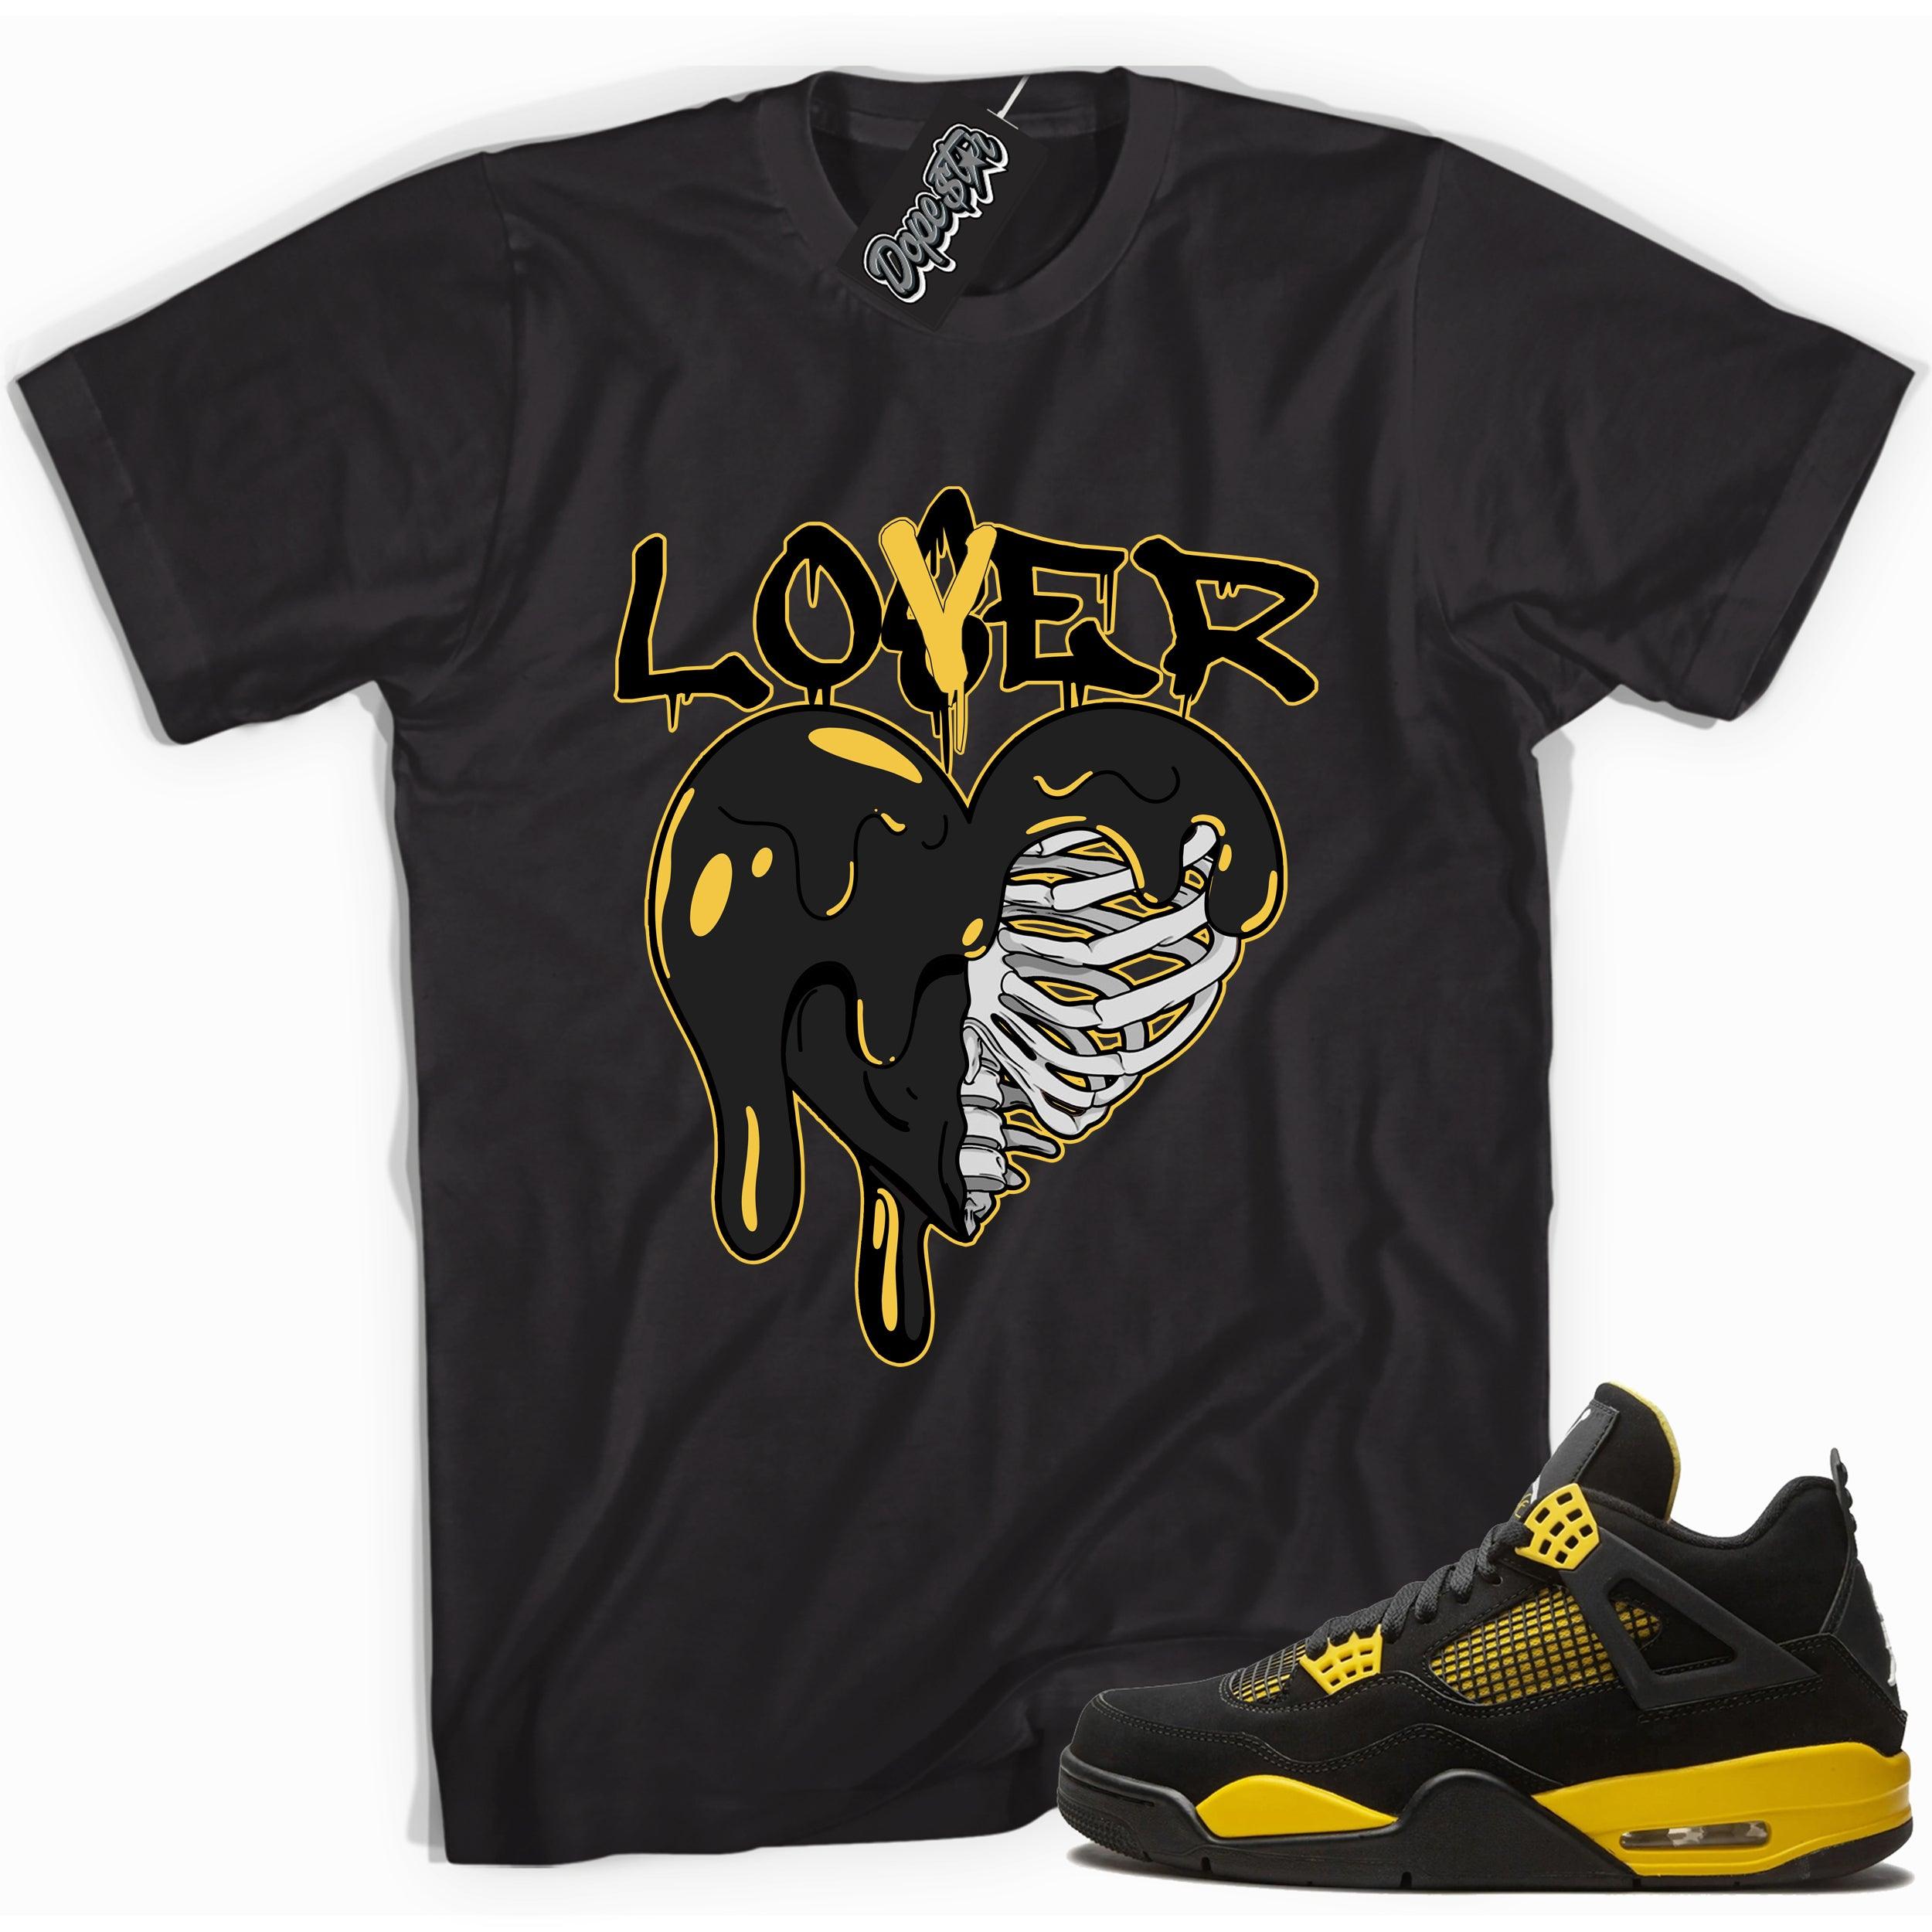 Cool black graphic tee with 'lover loser heart' print, that perfectly matches  Air Jordan 4 Thunder sneakers